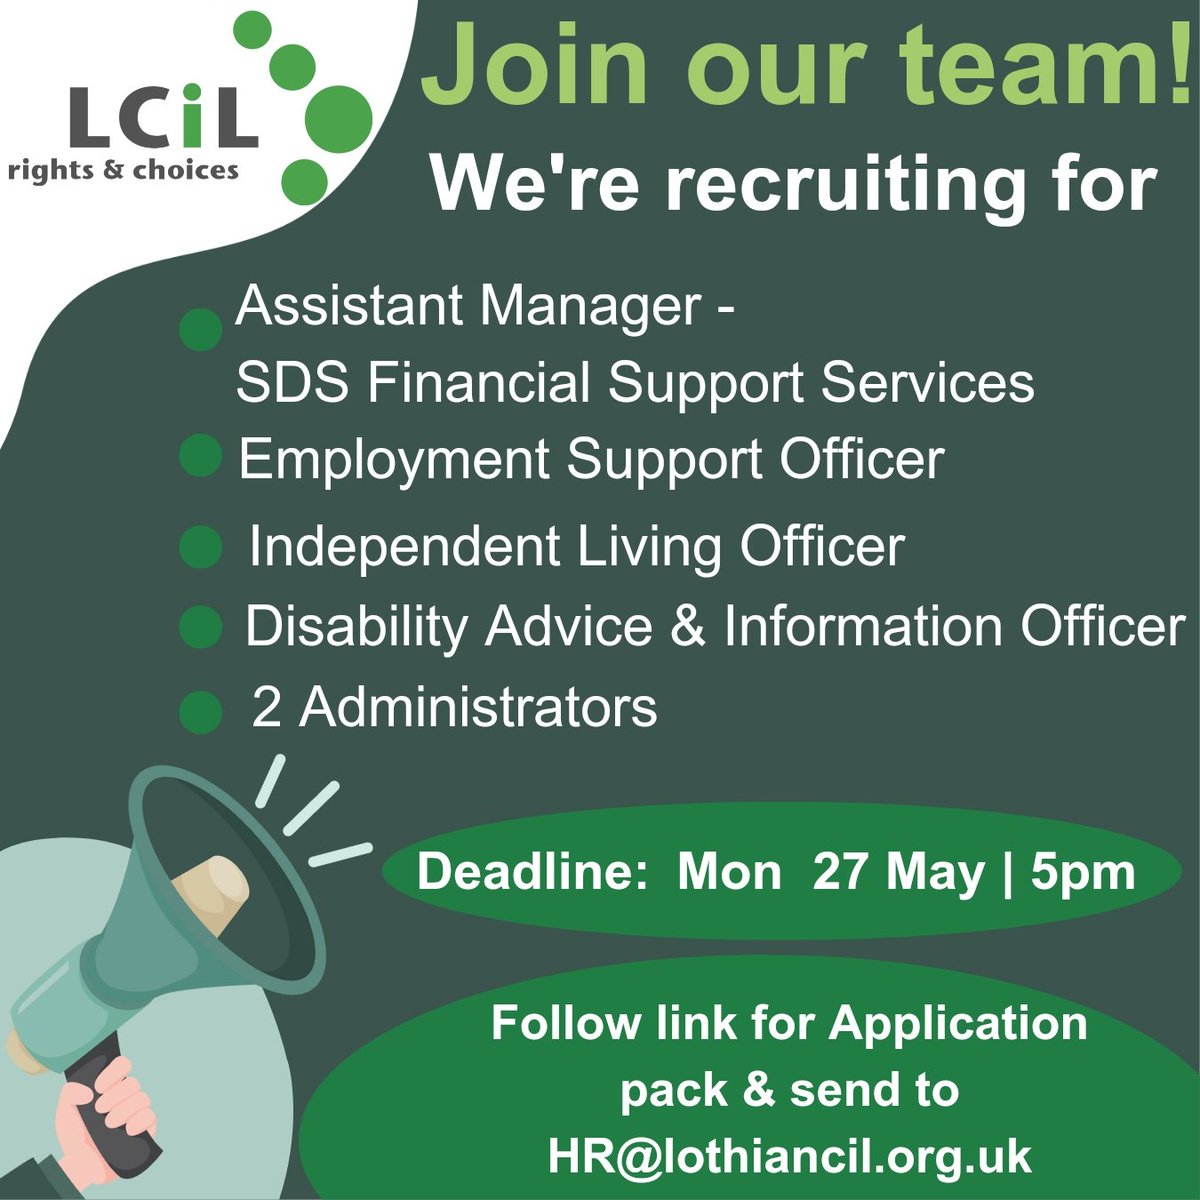 JOIN OUR TEAM! 💚💚
We're recruiting for various roles that support a growing organisation supporting and creating positive impact on the lives of disabled people everyday!
Find out more and apply today 👉👉 lothiancil.org.uk/who-we-are/wor…
#jobs #charityjobs #Edinburgh